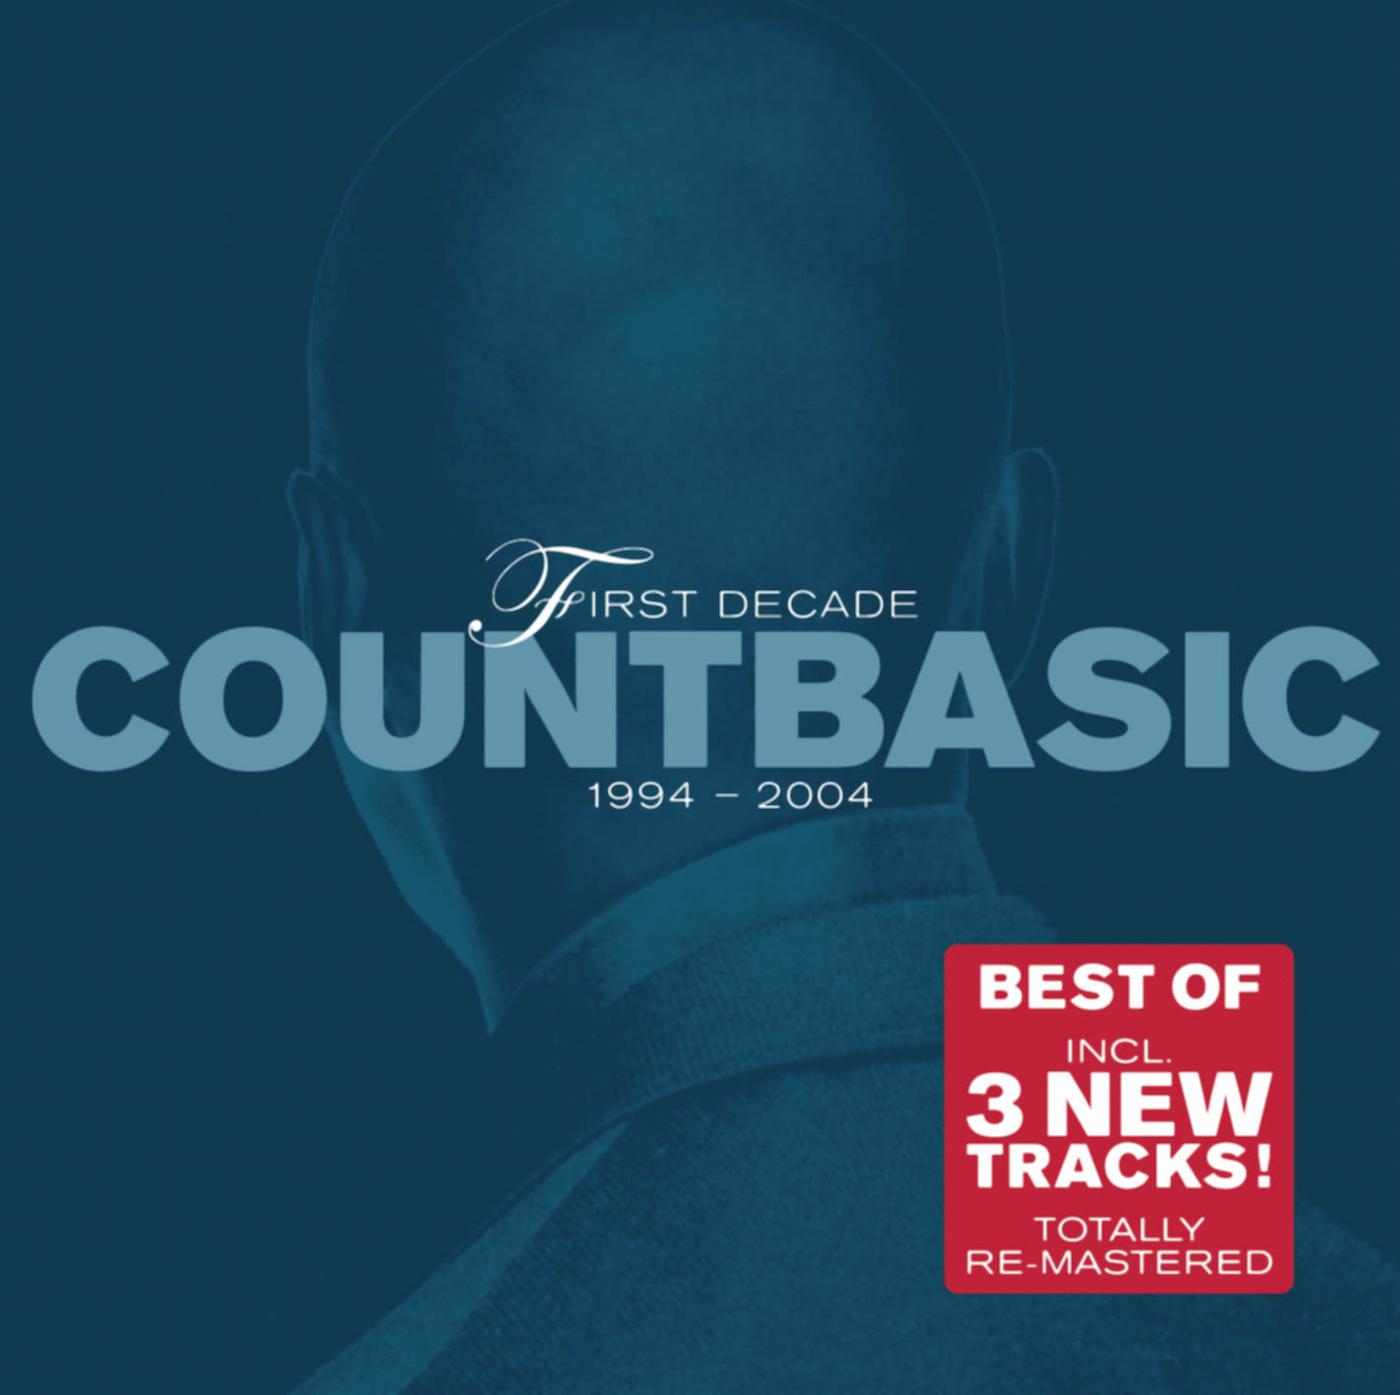 Count Basic - M.L. In The Sunshine